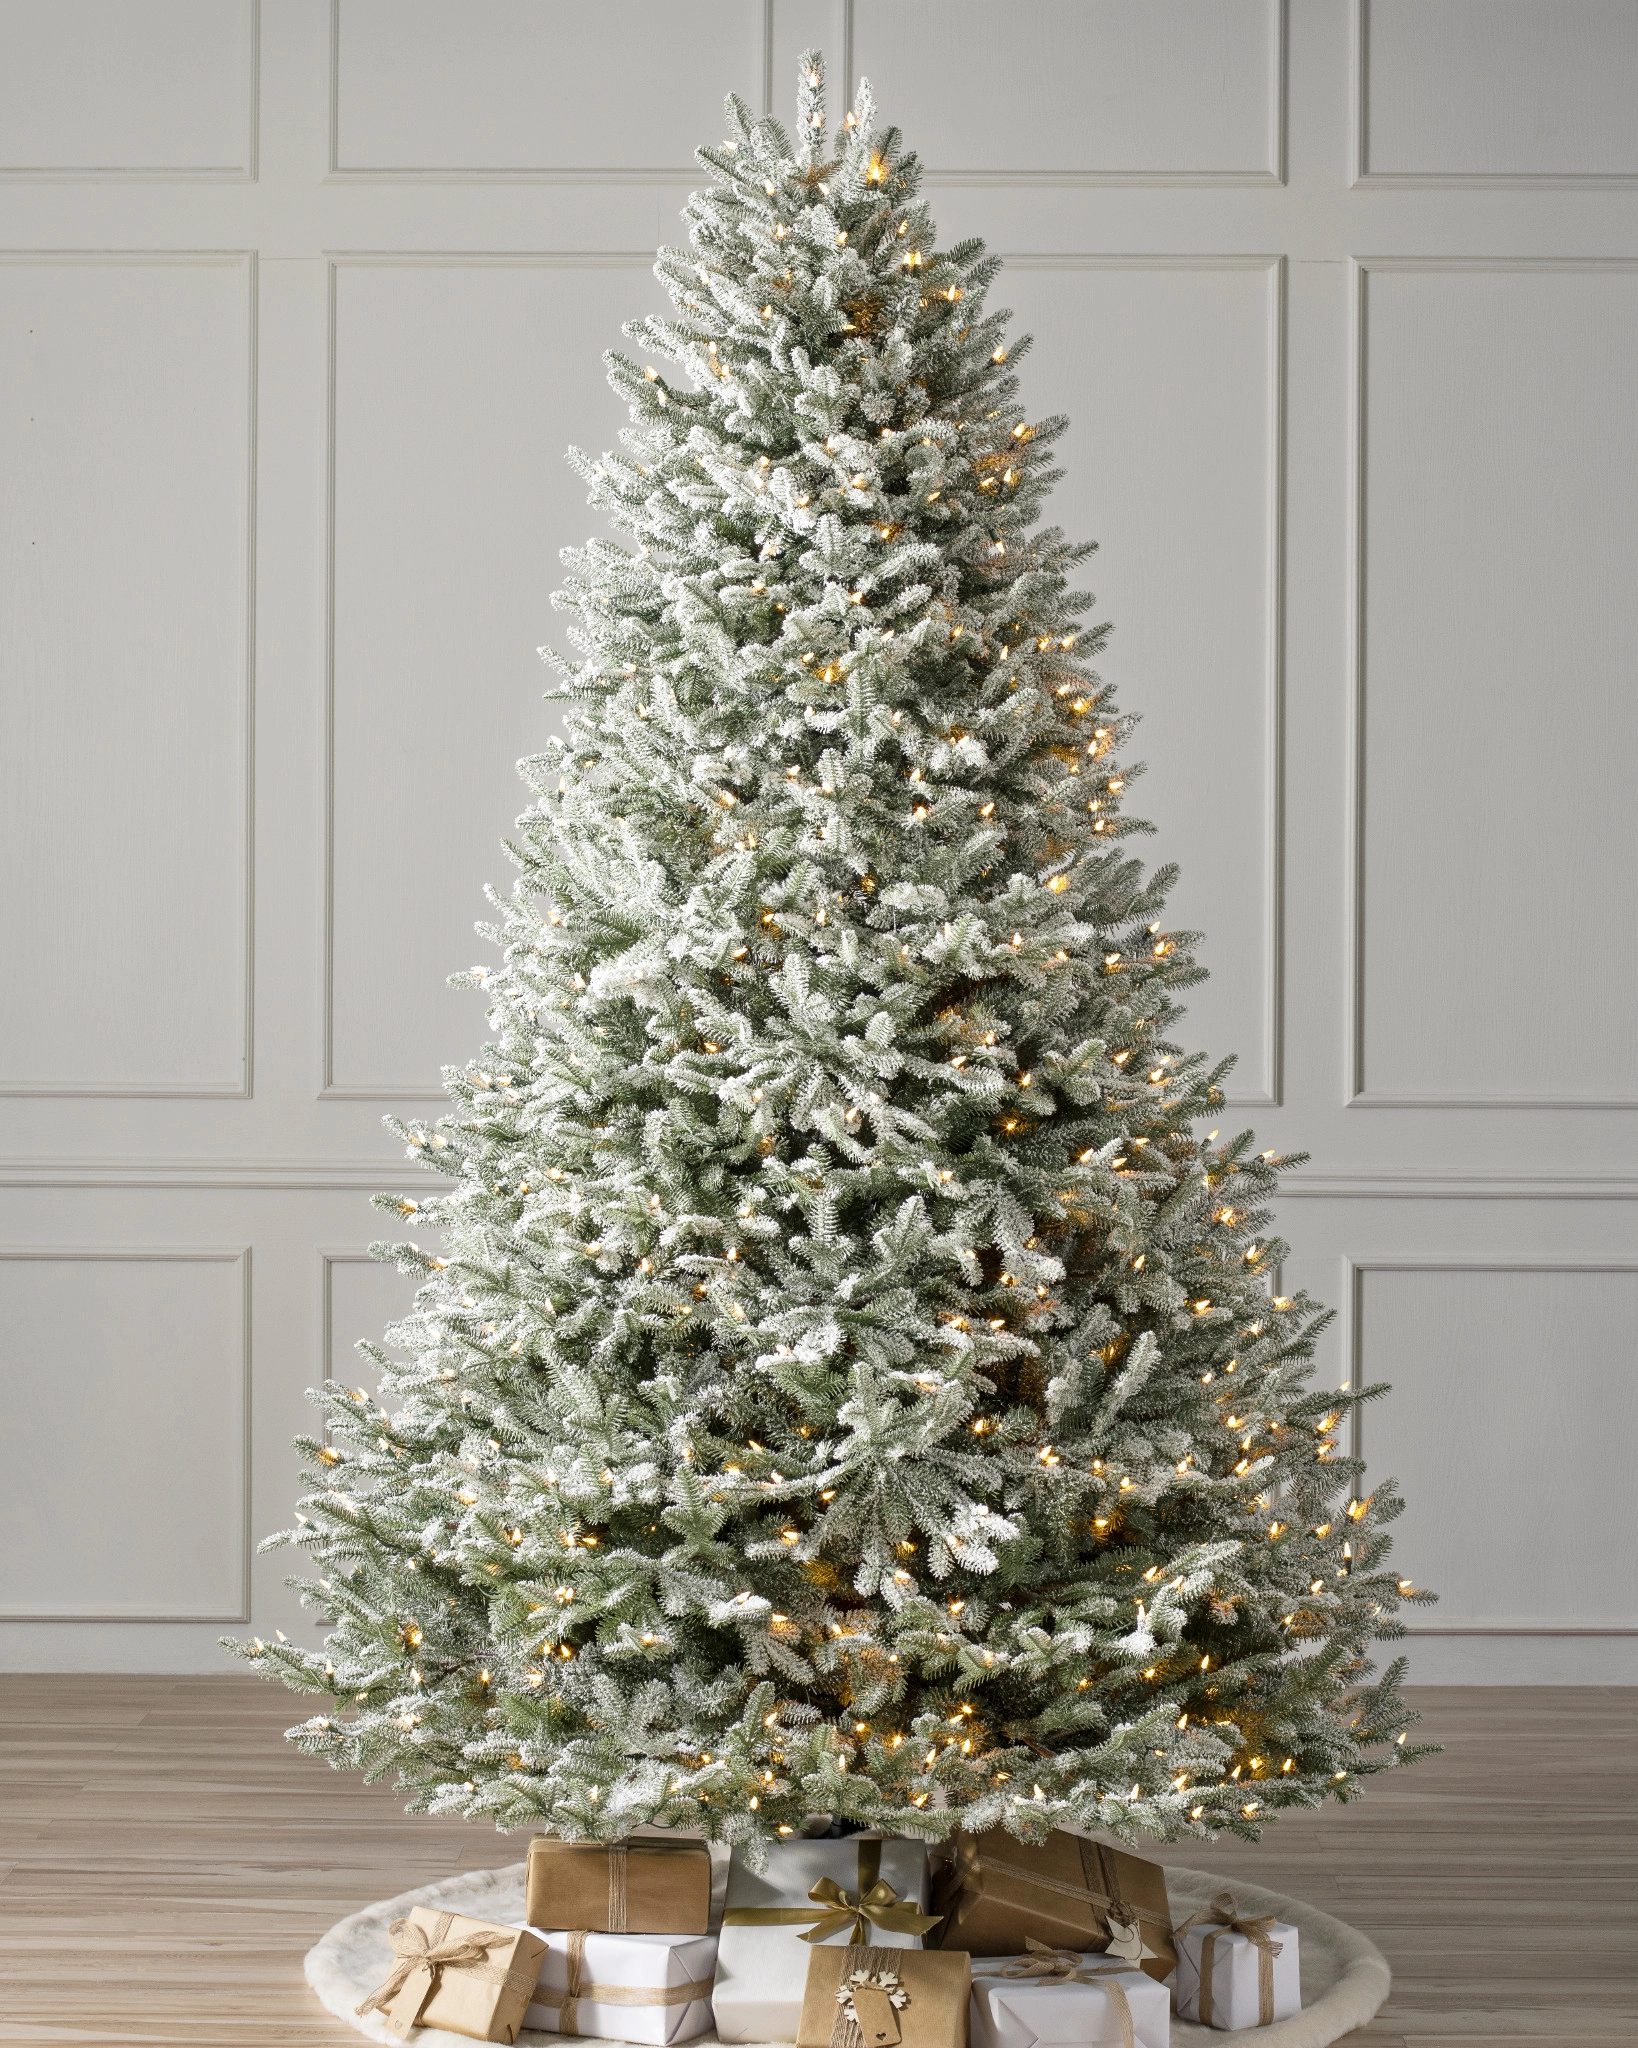 How to Decorate a Frosted Christmas Tree - Balsam Hill Blog